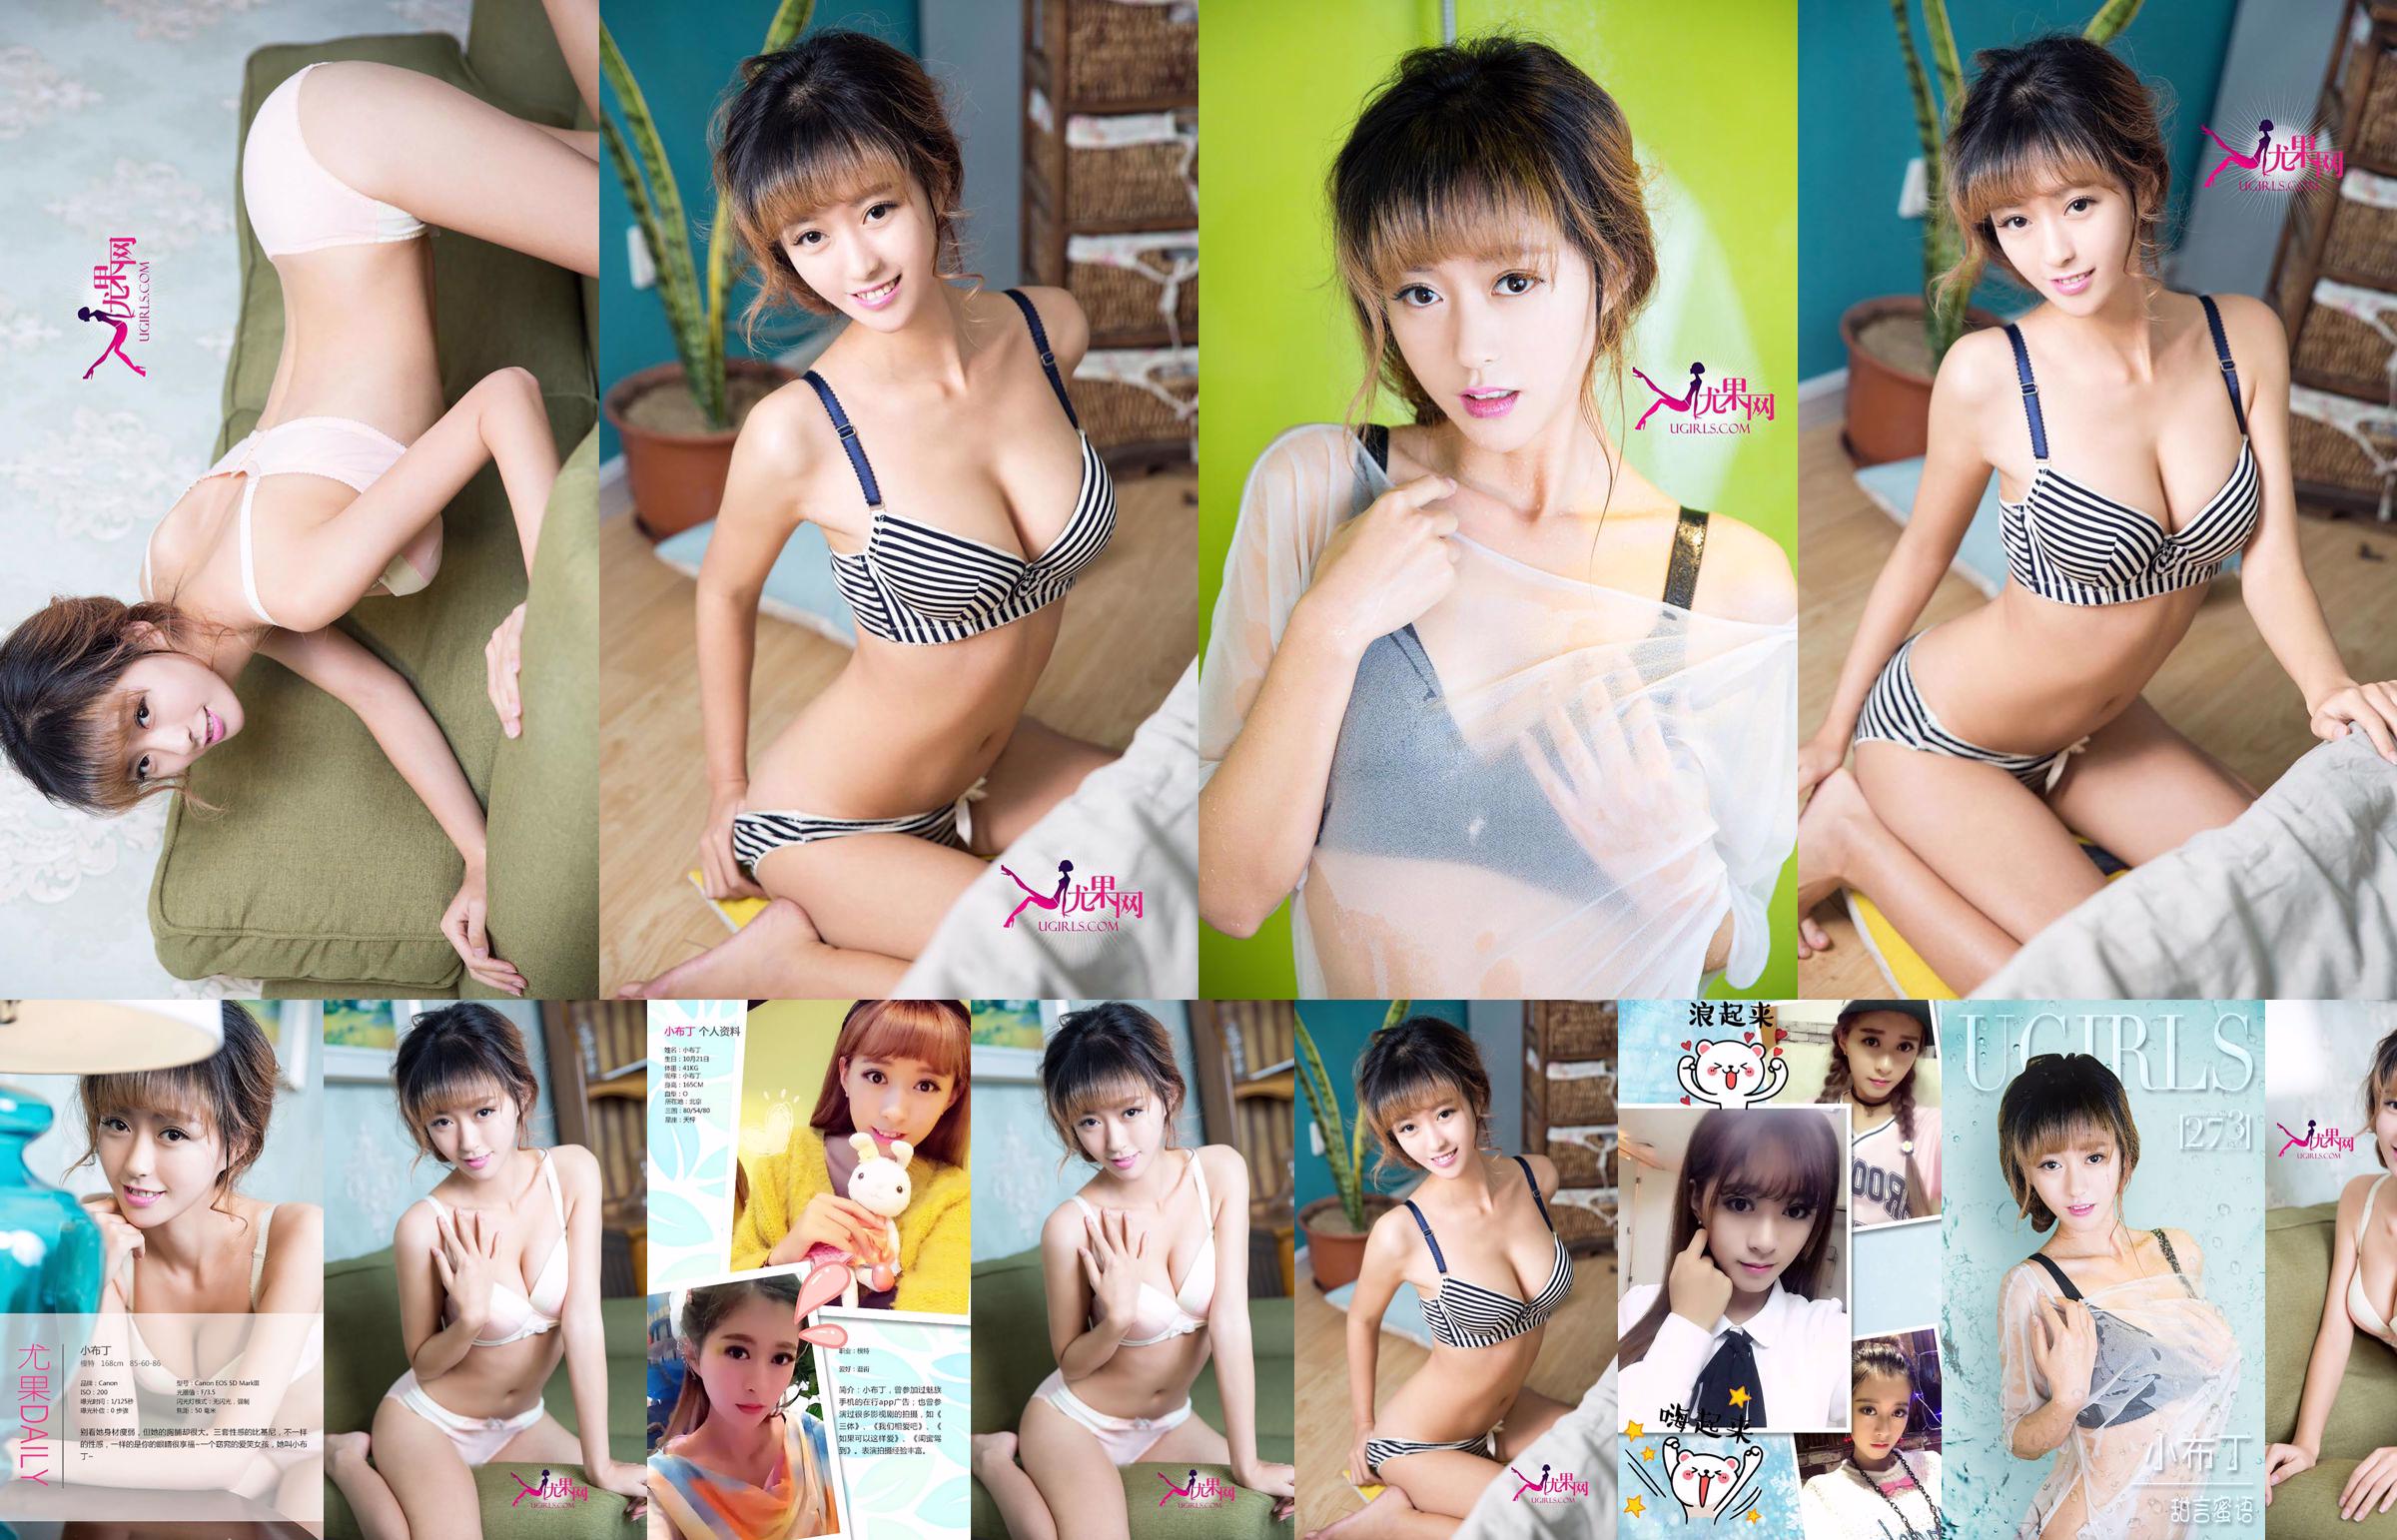 You Unana "Red Underwear + Swimsuit + One-piece Stockings" [Green Beans Guest] No.35aa68 Page 2